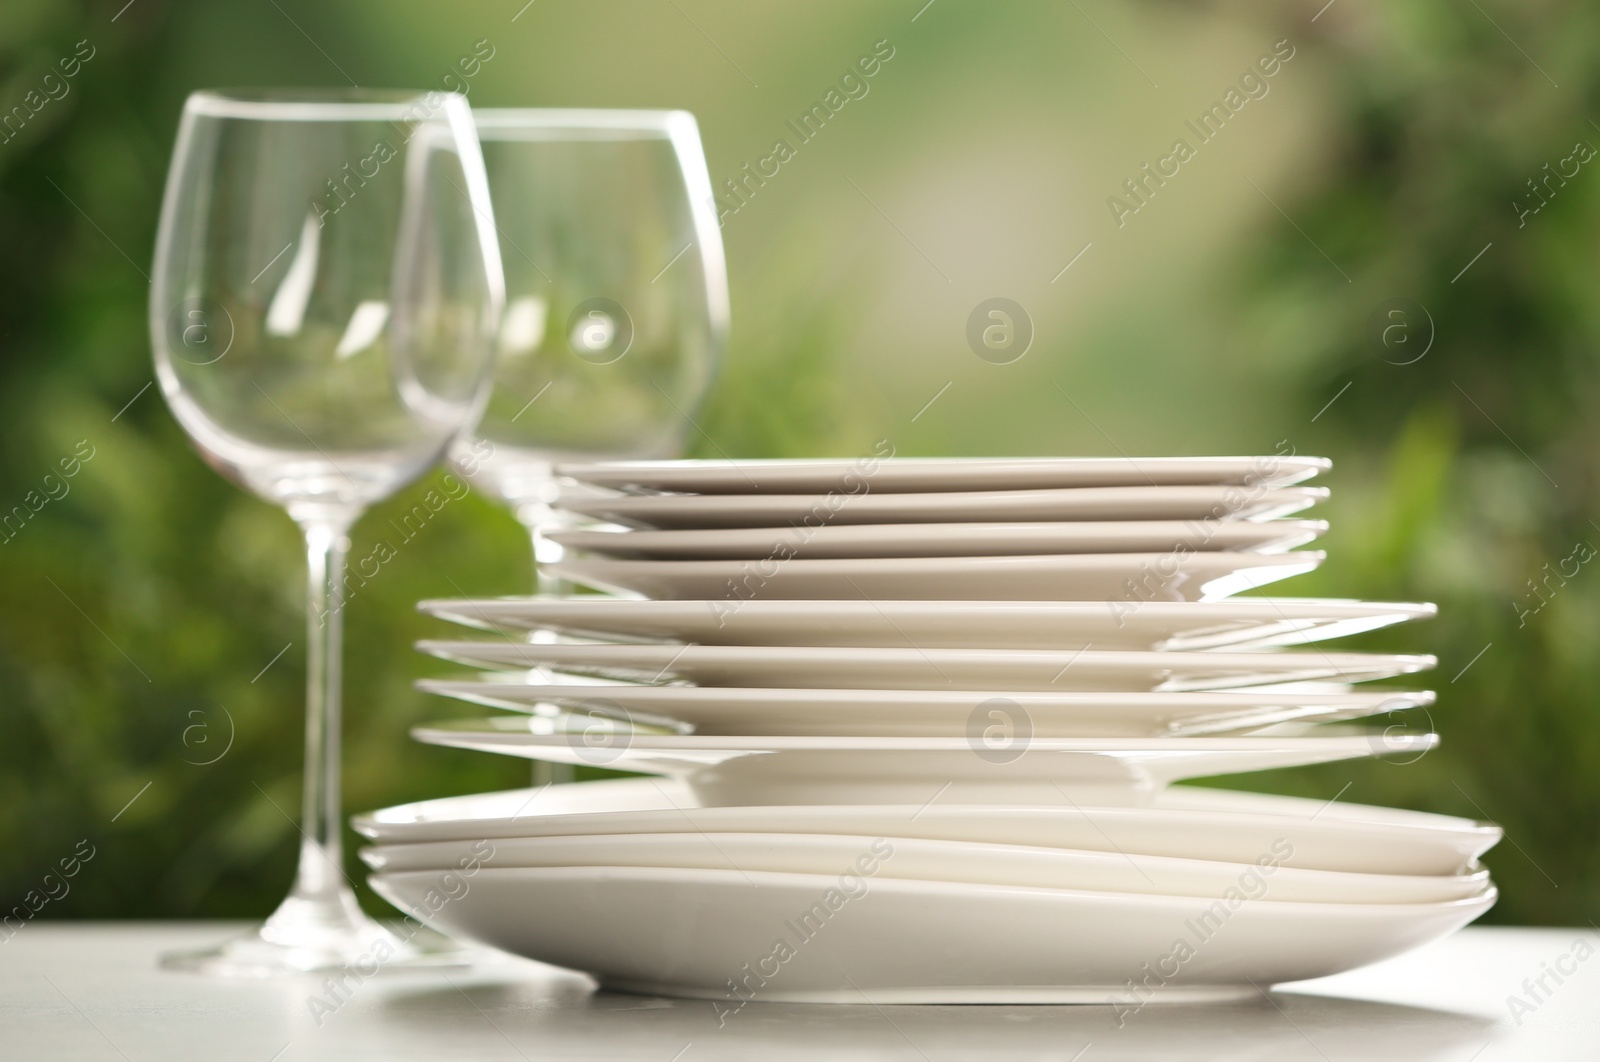 Photo of Set of clean dishware and wineglasses on grey table against blurred background